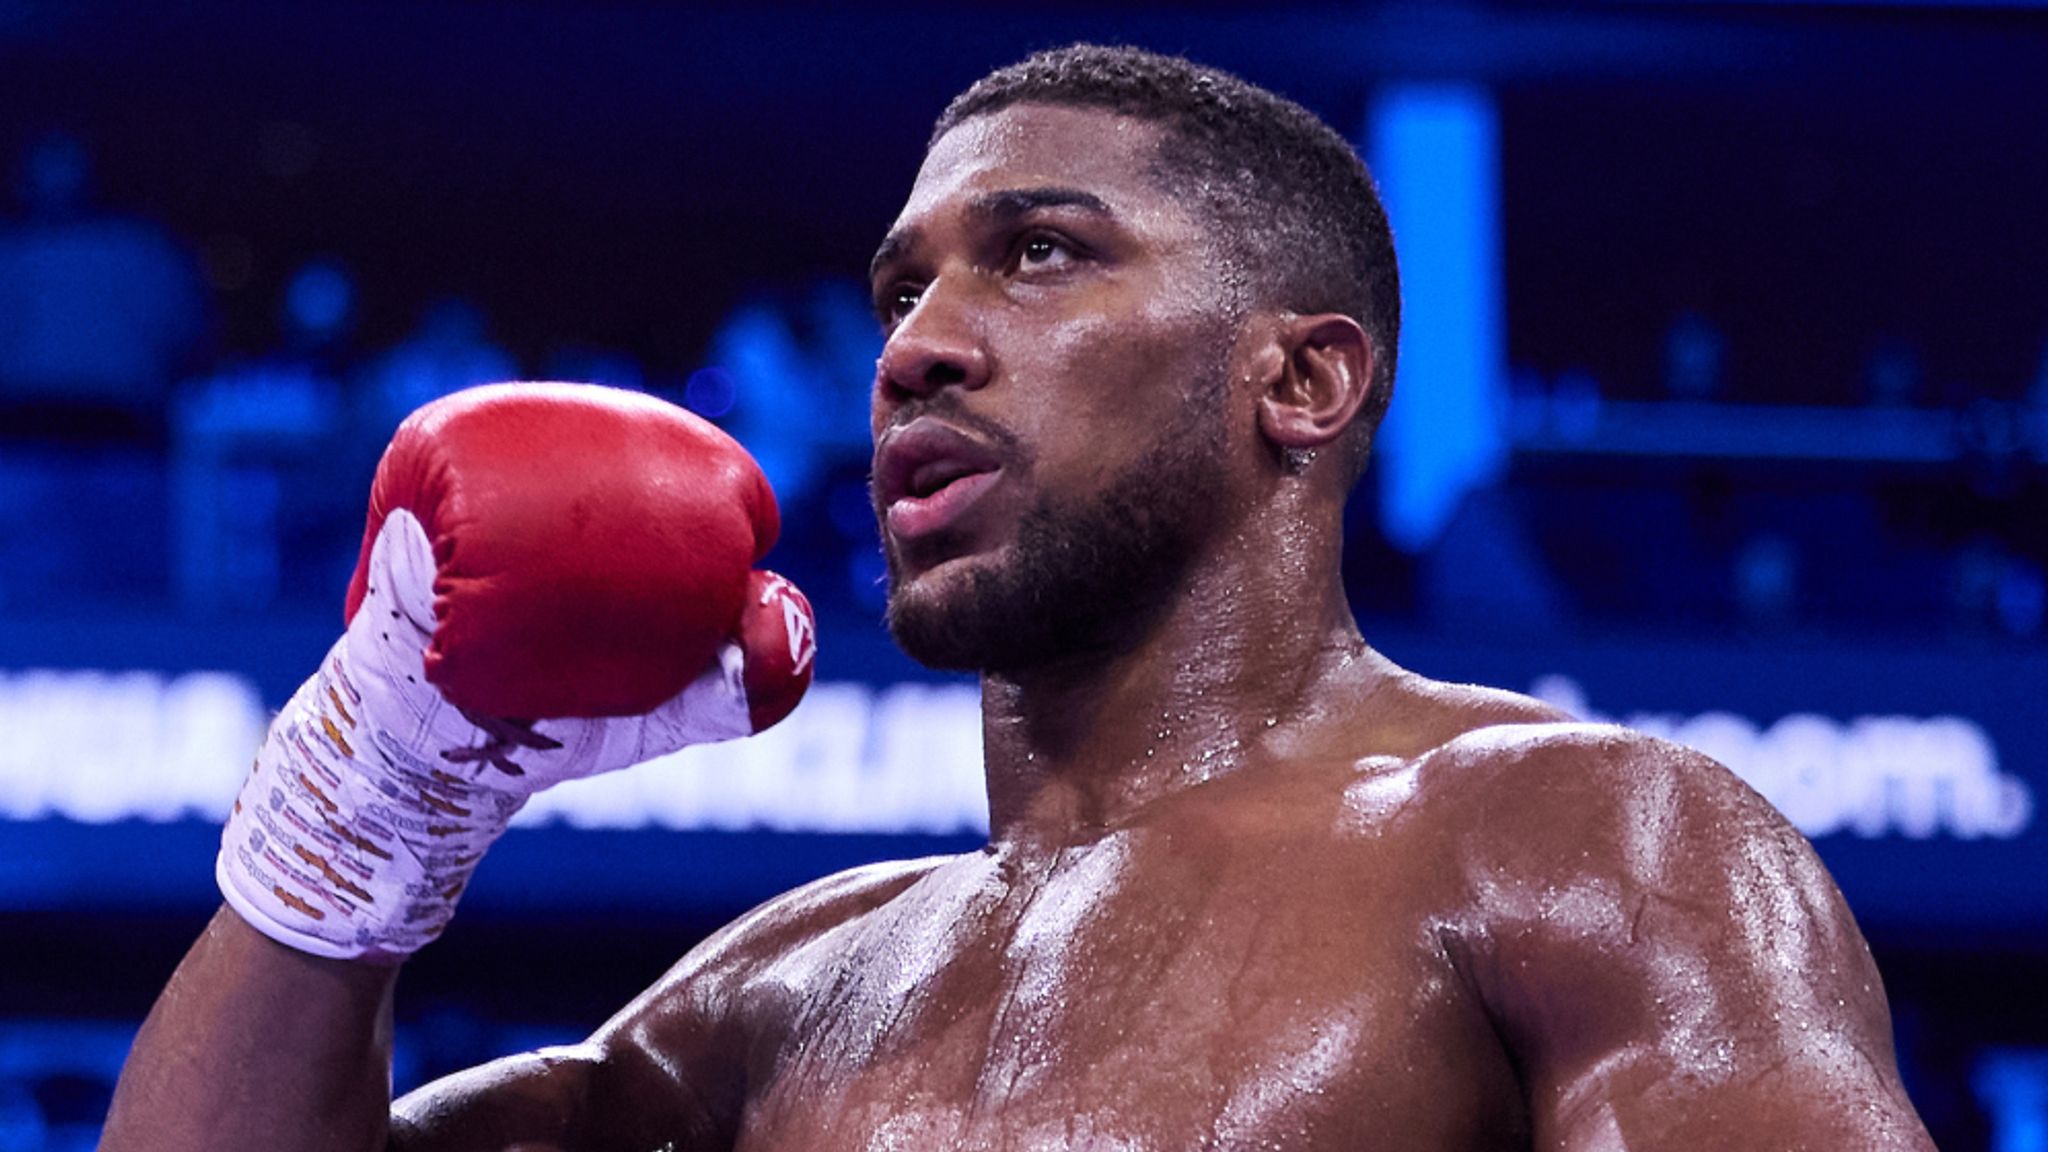 Anthony Joshua has expressed his intention to aim for the victor of the Tyson Fury versus Oleksandr Usyk bout following his knockout victory over Francis Ngannou.